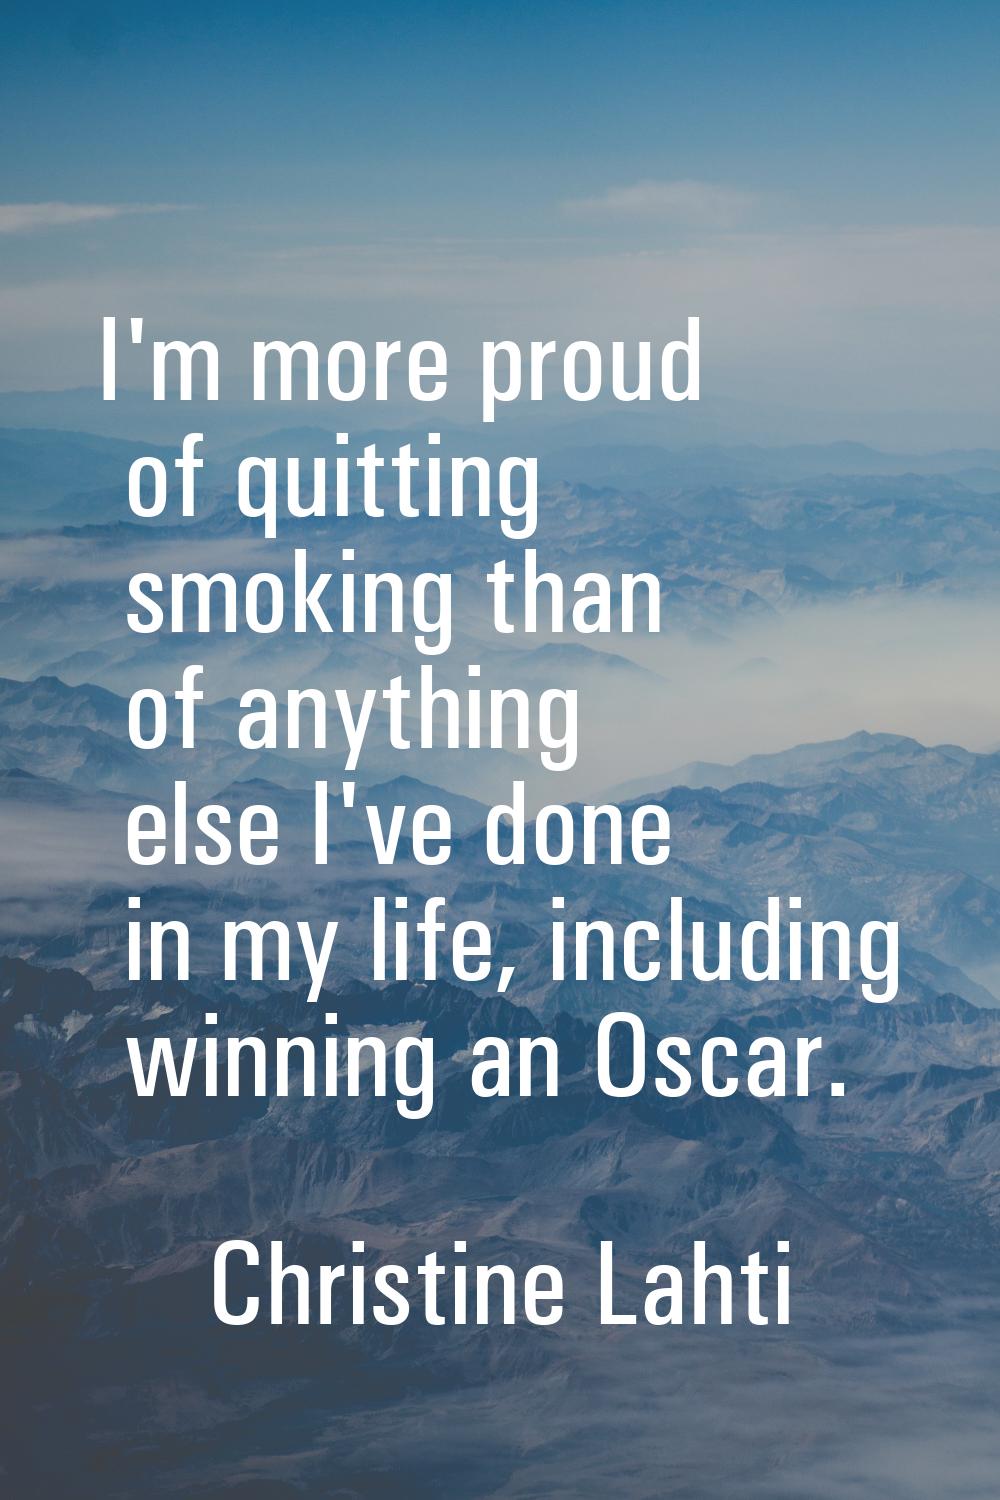 I'm more proud of quitting smoking than of anything else I've done in my life, including winning an